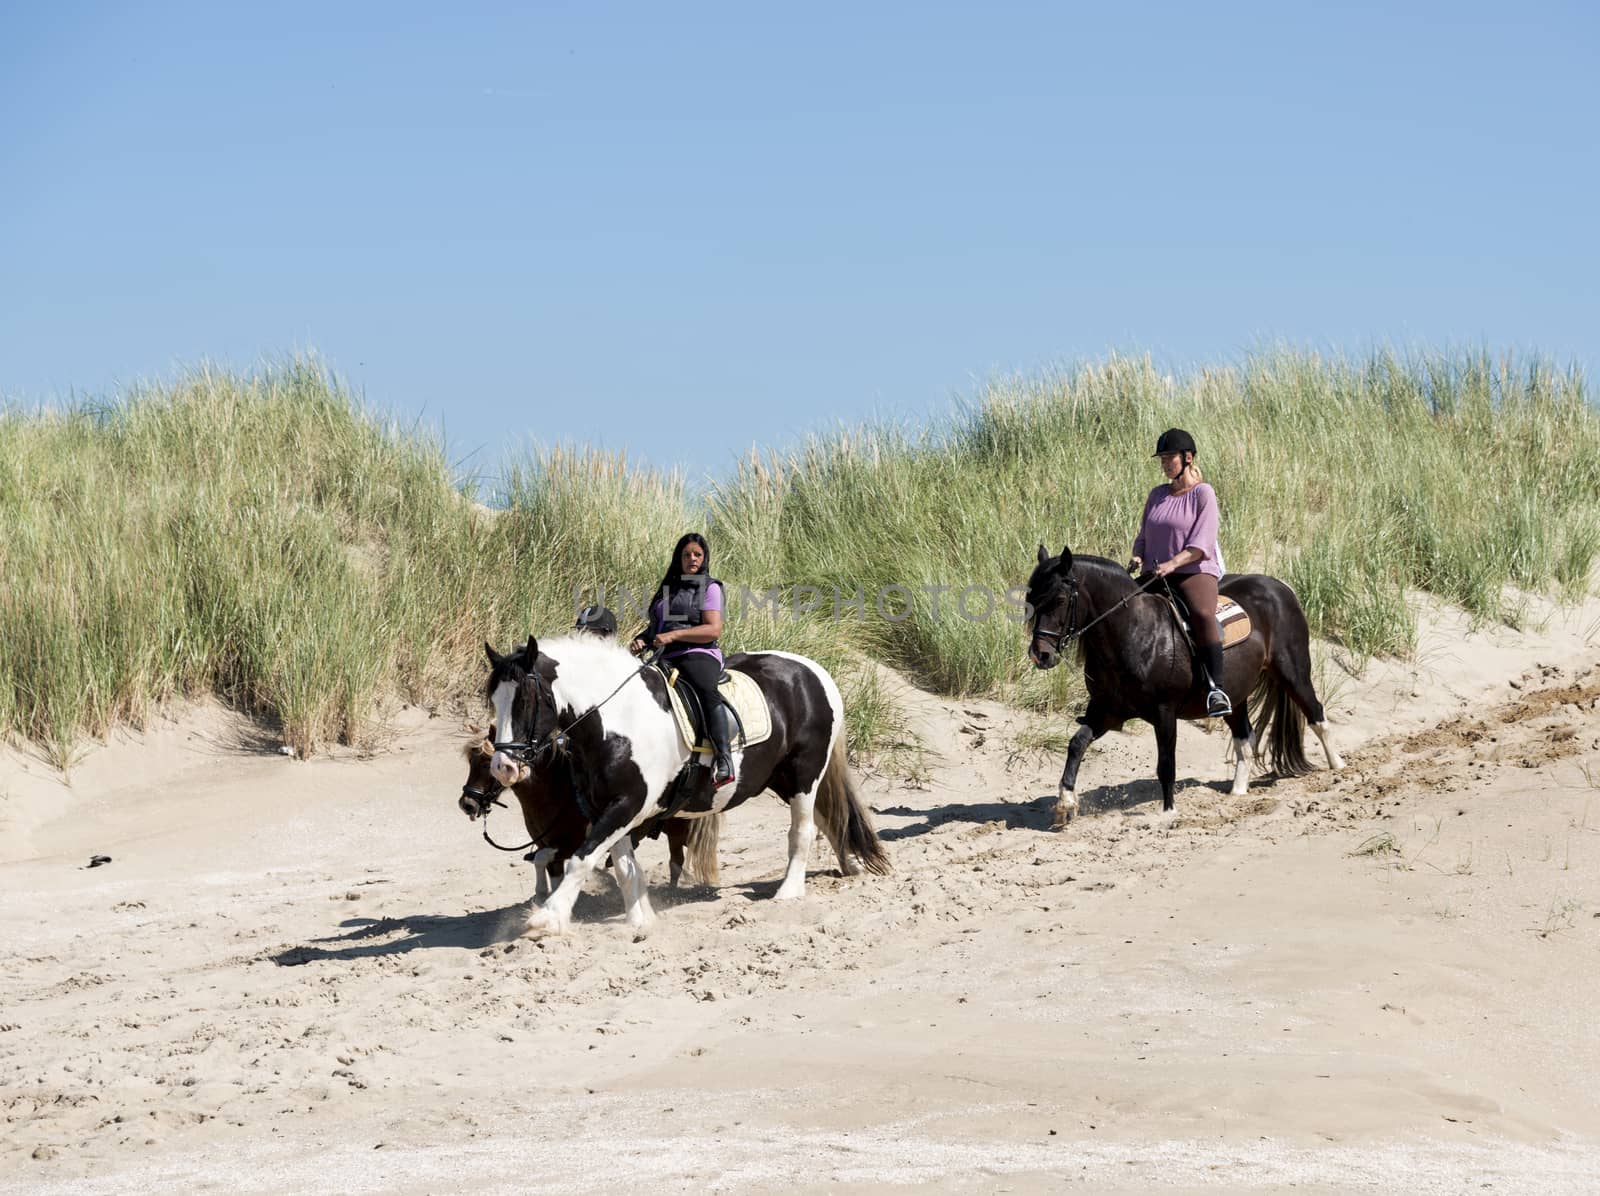 HELLEVOETSLUIS,NETHERLANDS - AUG 27: Two girls riding on horse on the beach in, on June 28,2014 in Hellevoetsluis, this beach is a free riding beach for horses